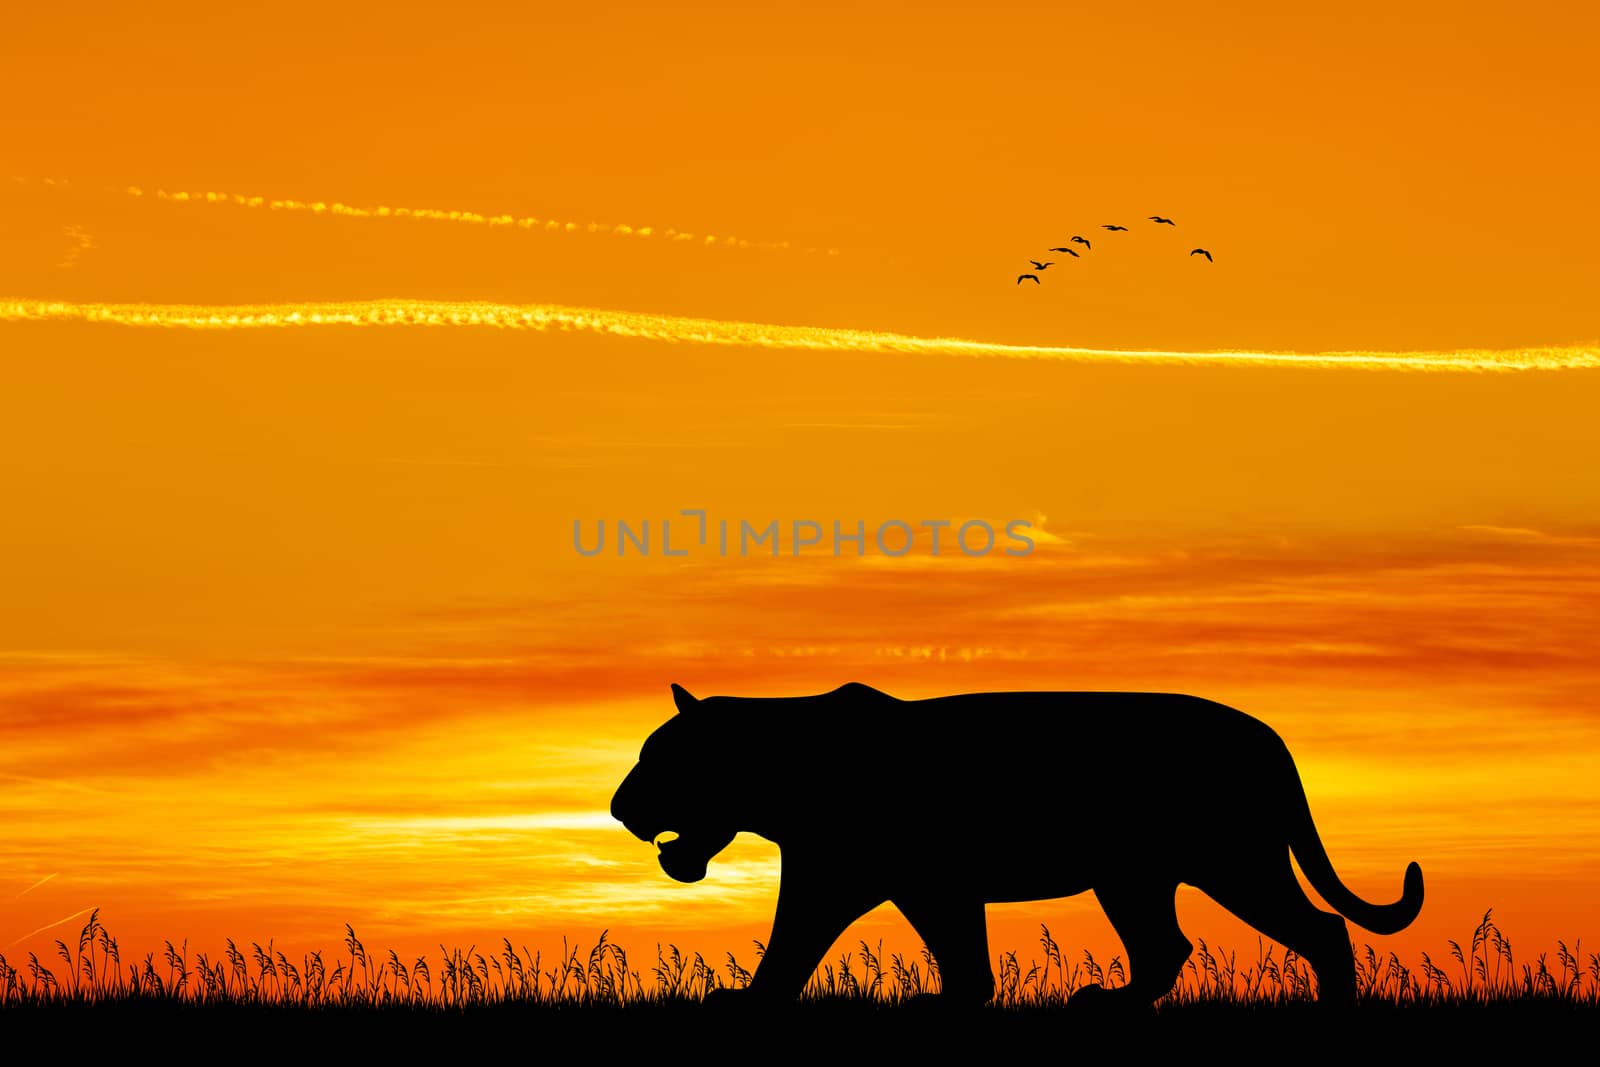 tiger silhouette at sunset by adrenalina